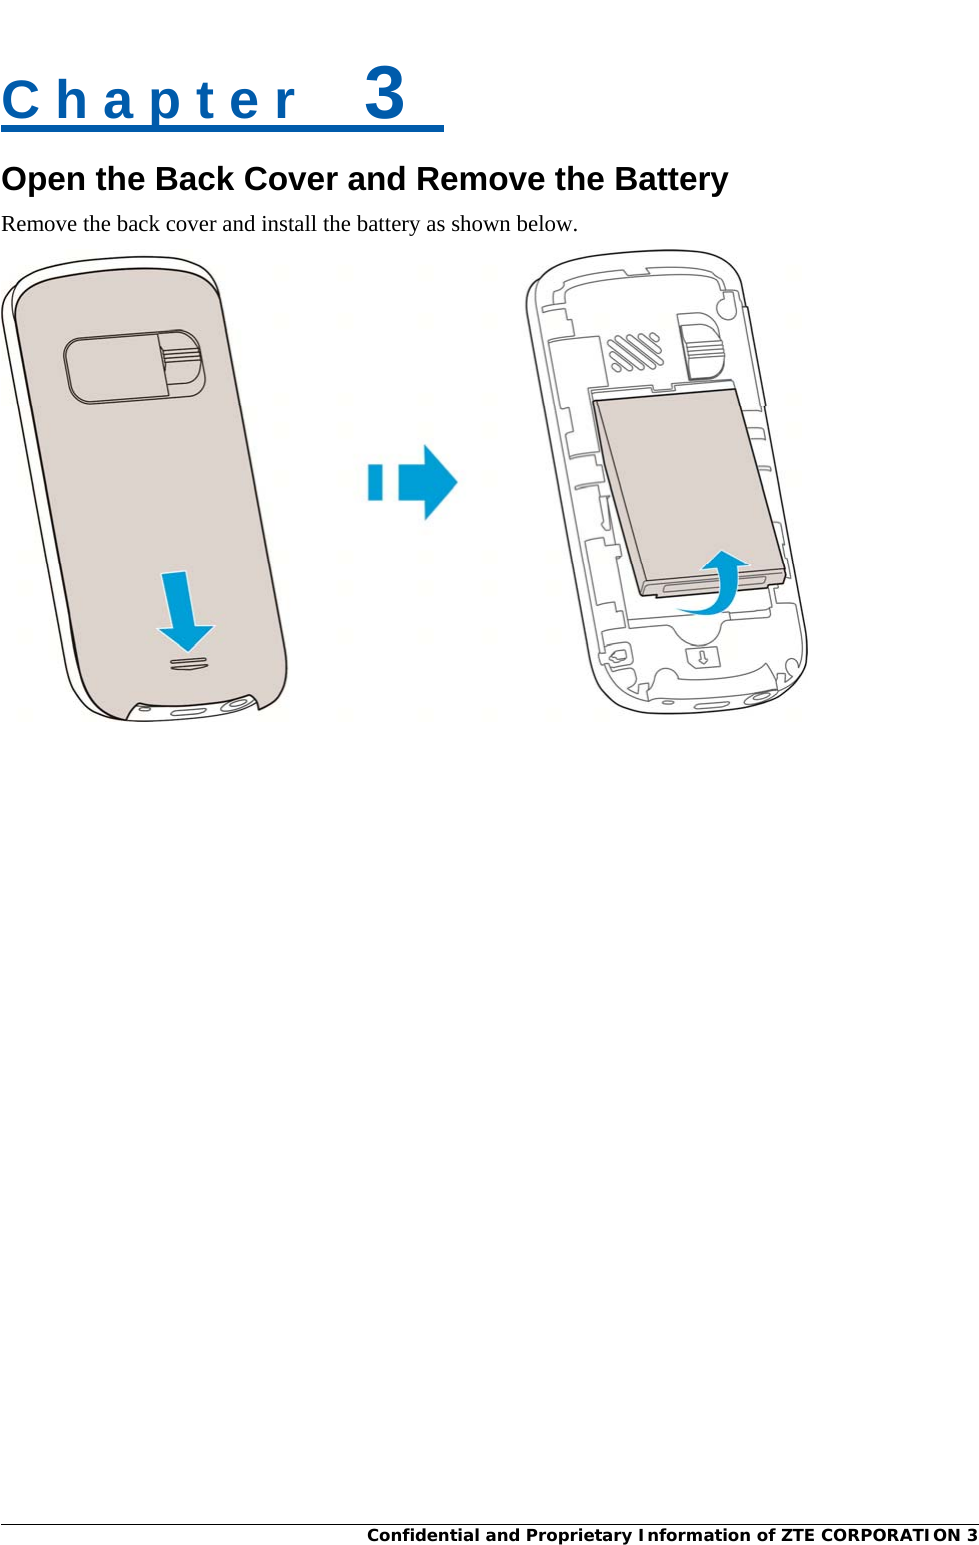     Confidential and Proprietary Information of ZTE CORPORATION 3C h a p t e r    3   Open the Back Cover and Remove the Battery Remove the back cover and install the battery as shown below.     